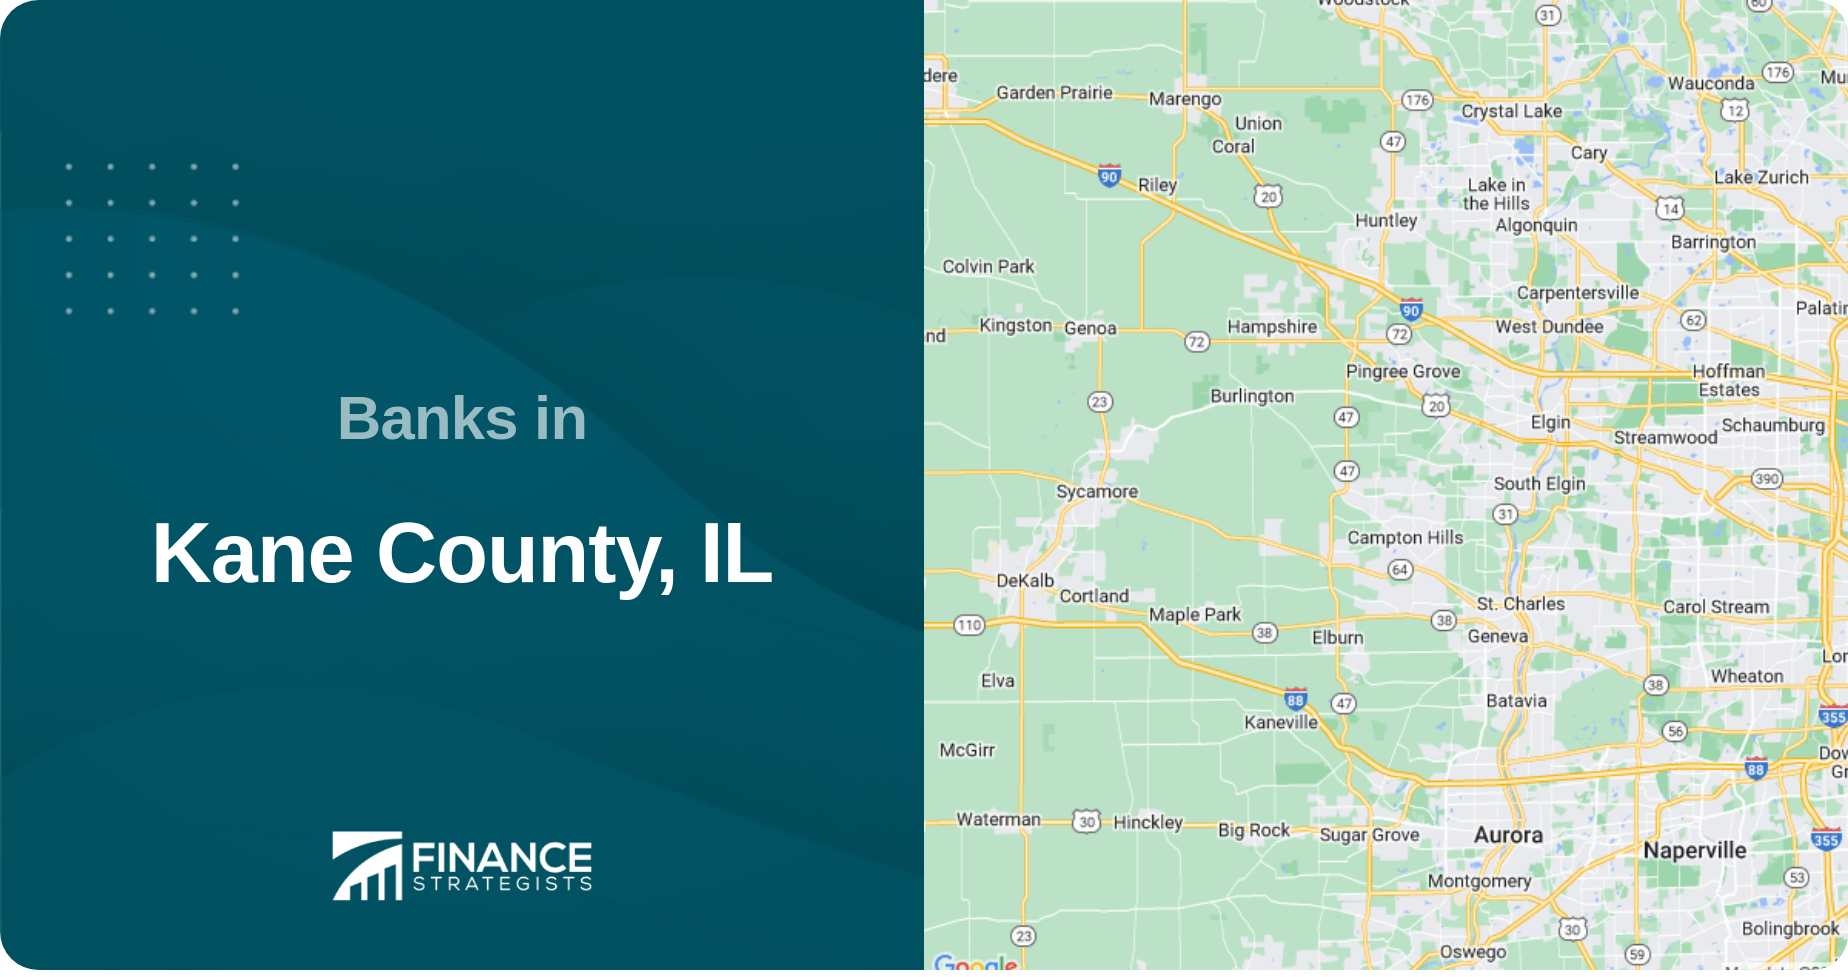 Banks in Kane County, IL